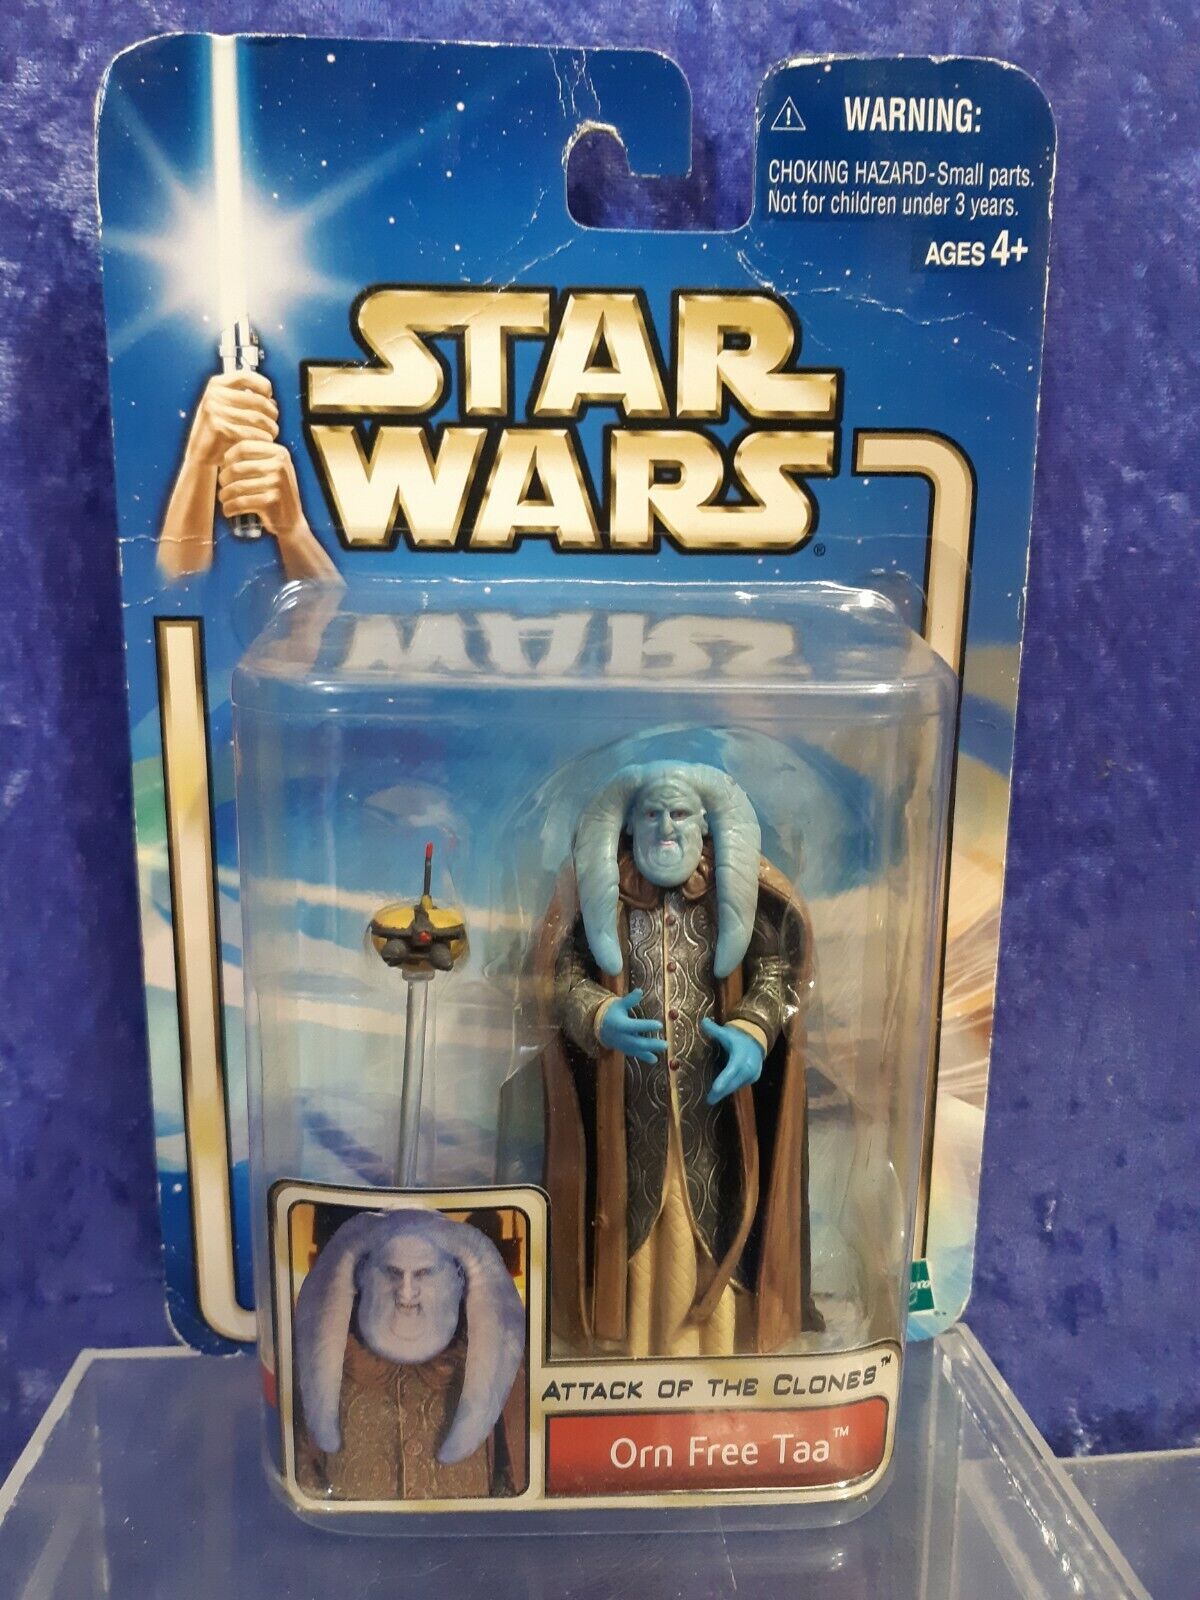 Star Wars Attack of the Clones 2002 MOC 35 Orn Free Taa #2570